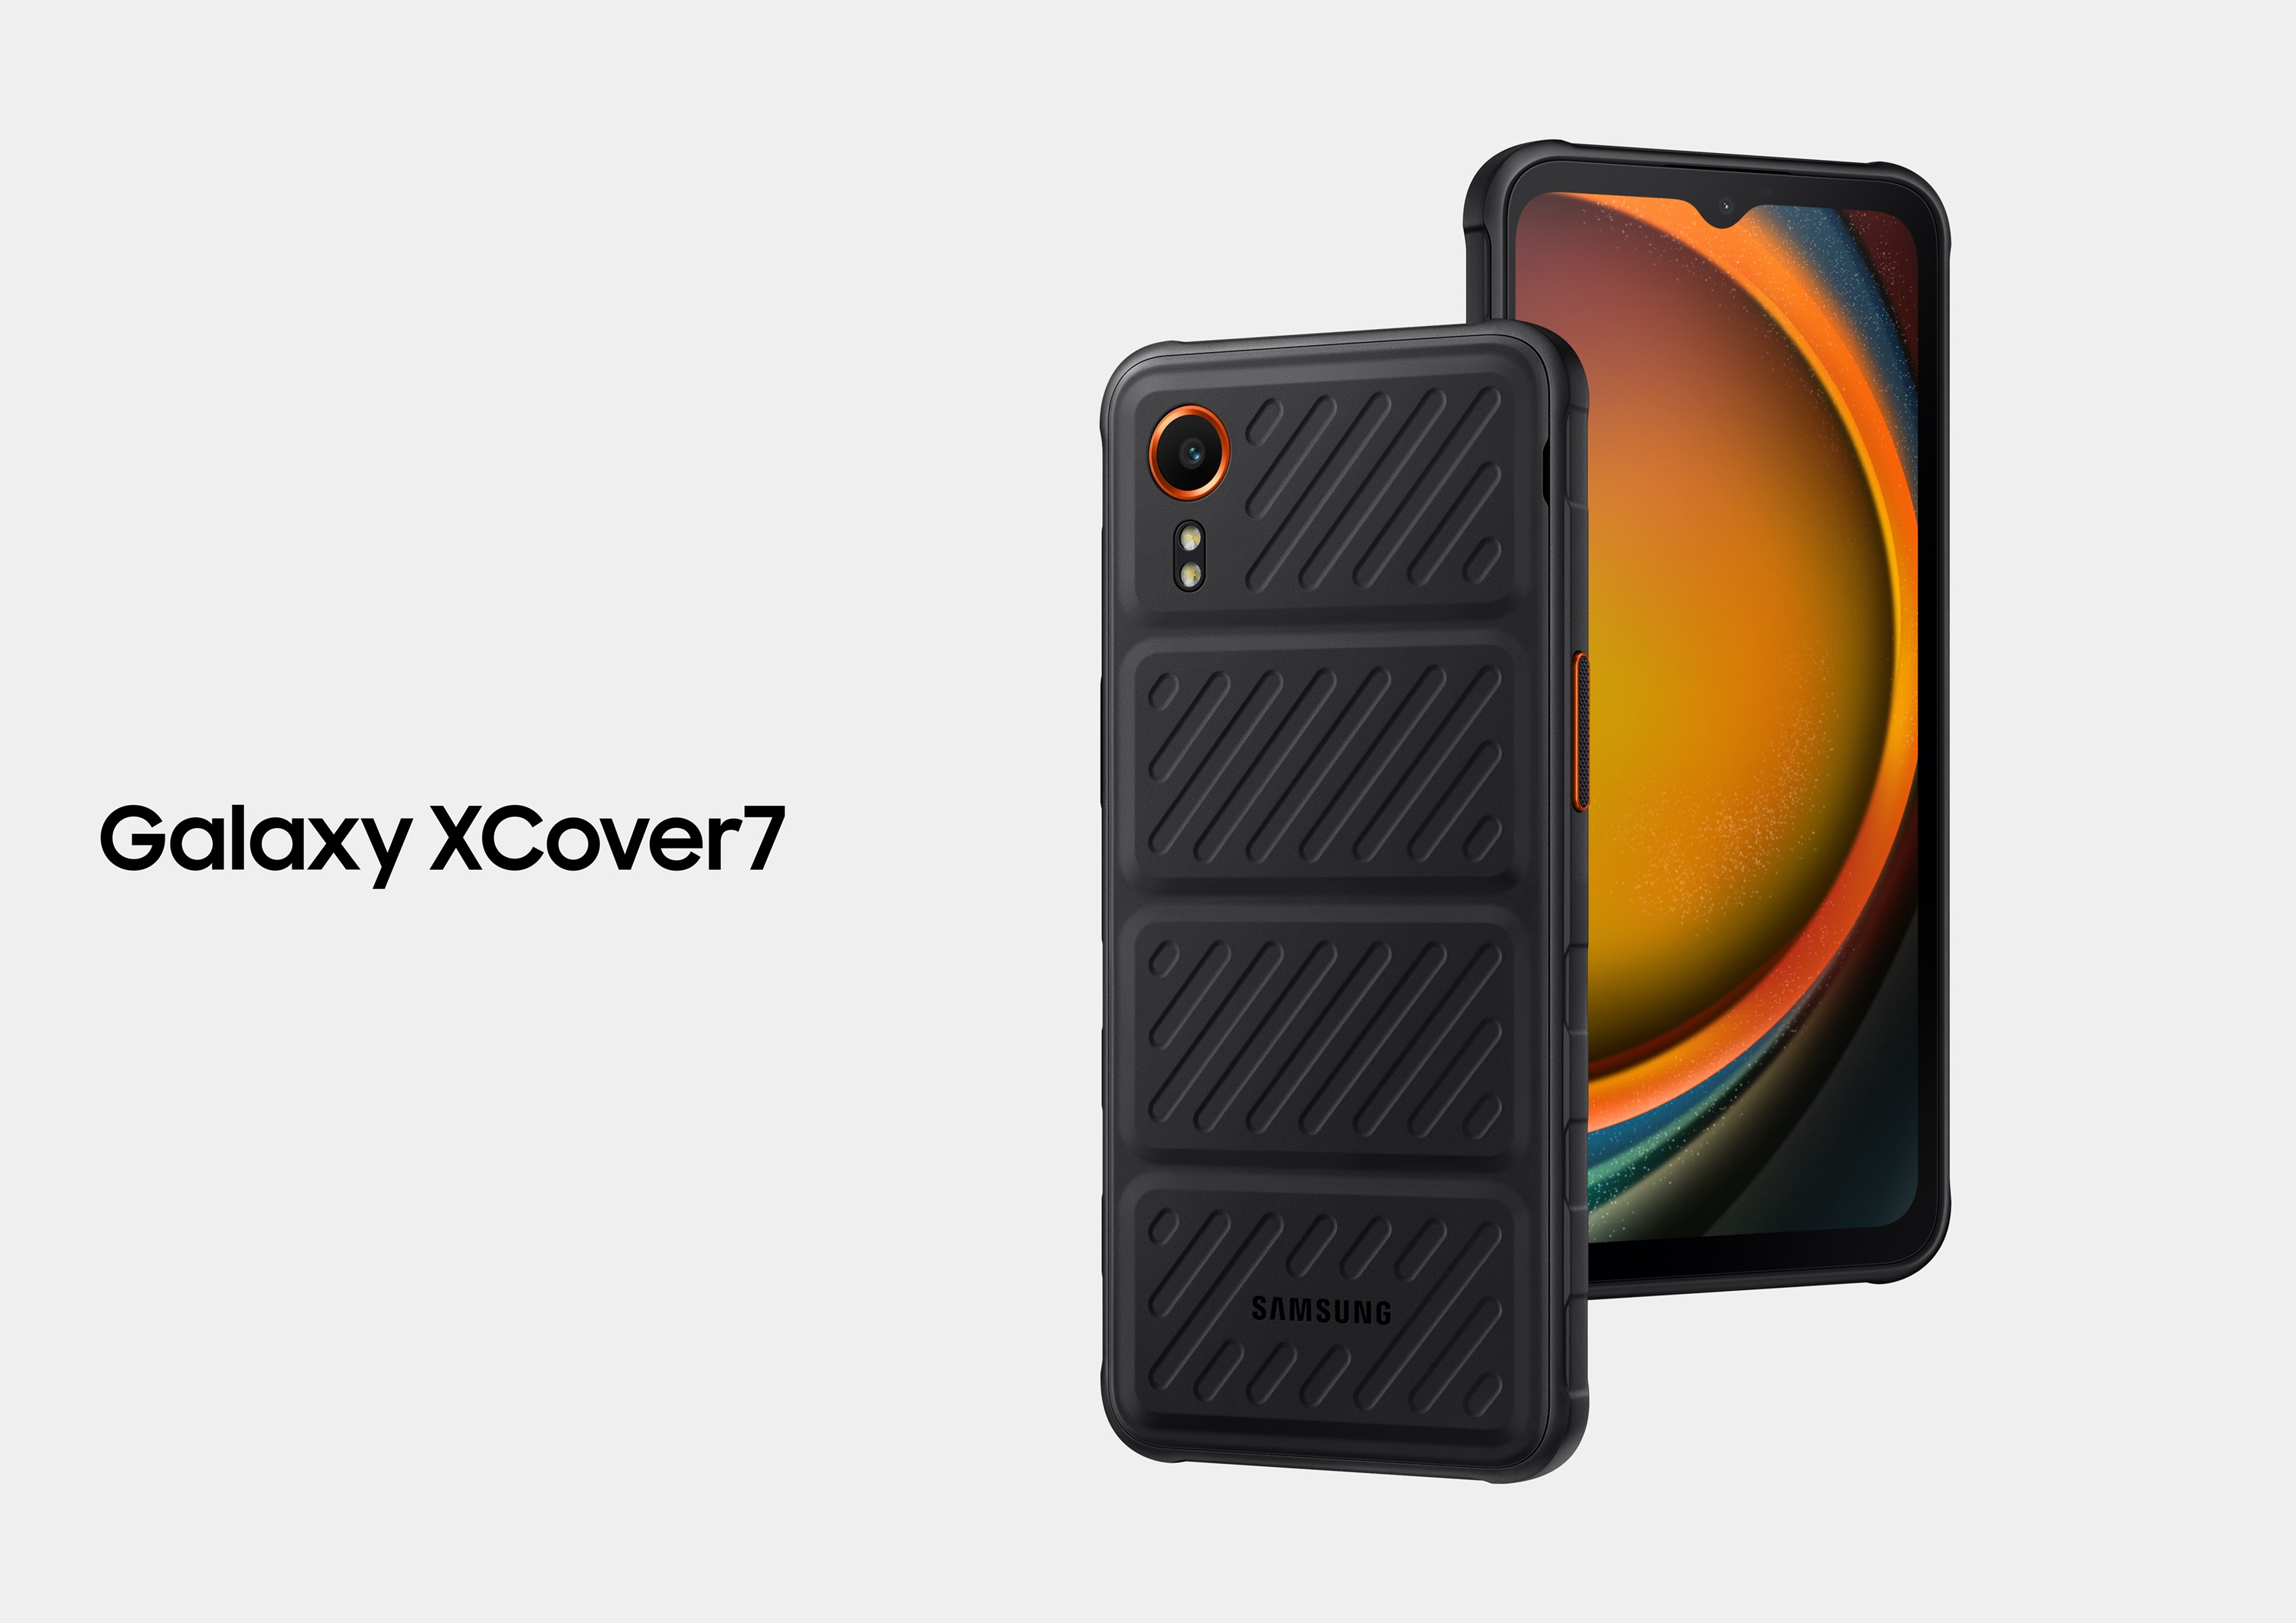 Samsung unveiled the Galaxy XCover 7: a smartphone with MIL-STD-810H and IP68 protection